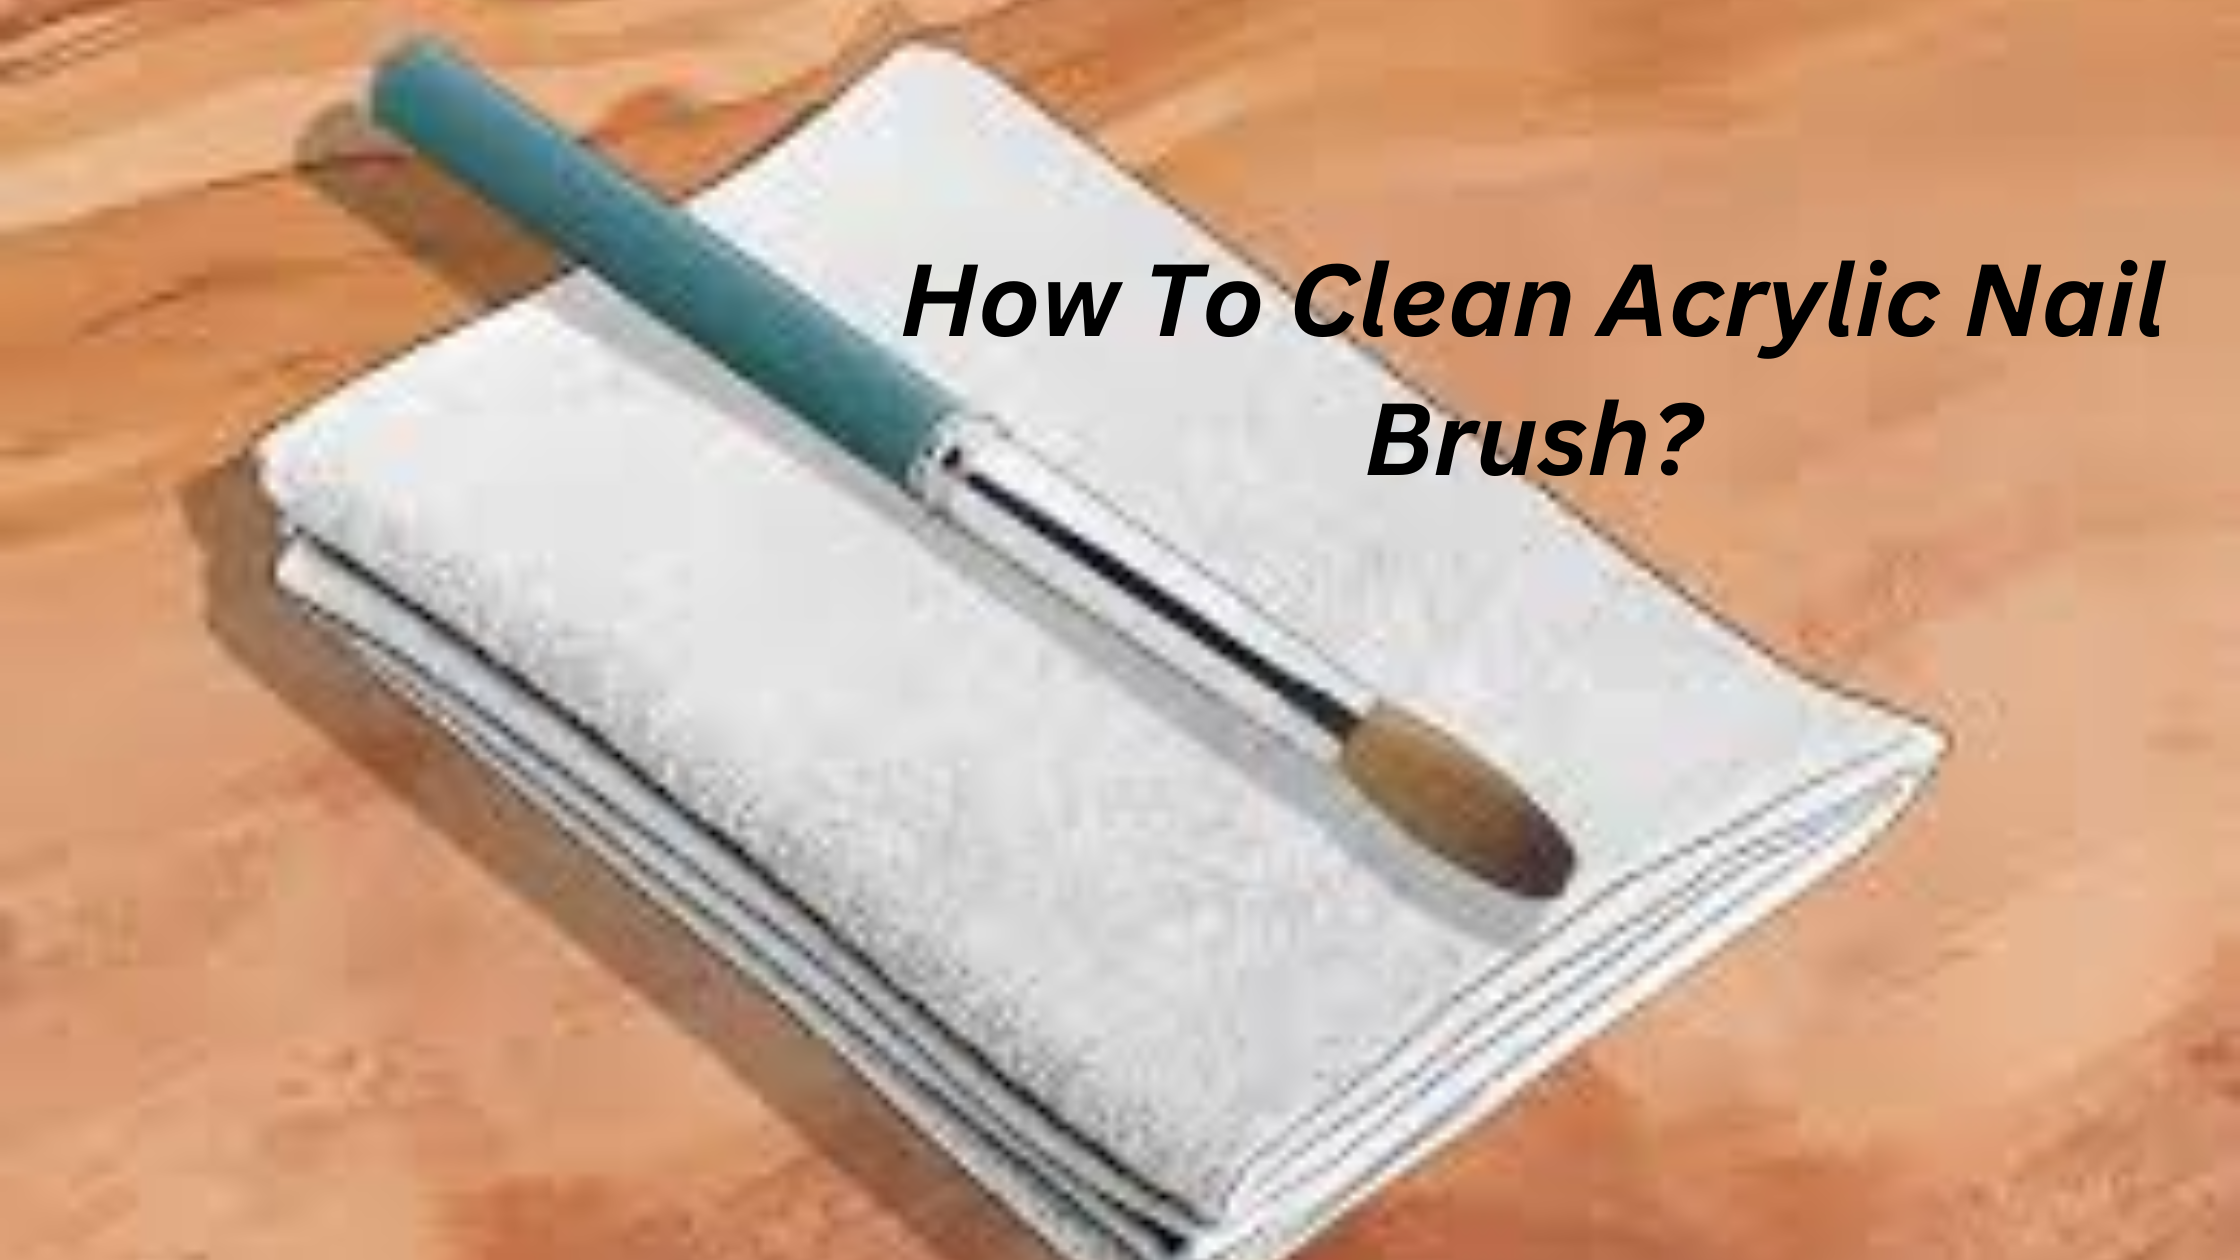 How To Clean Acrylic Nail Brush?